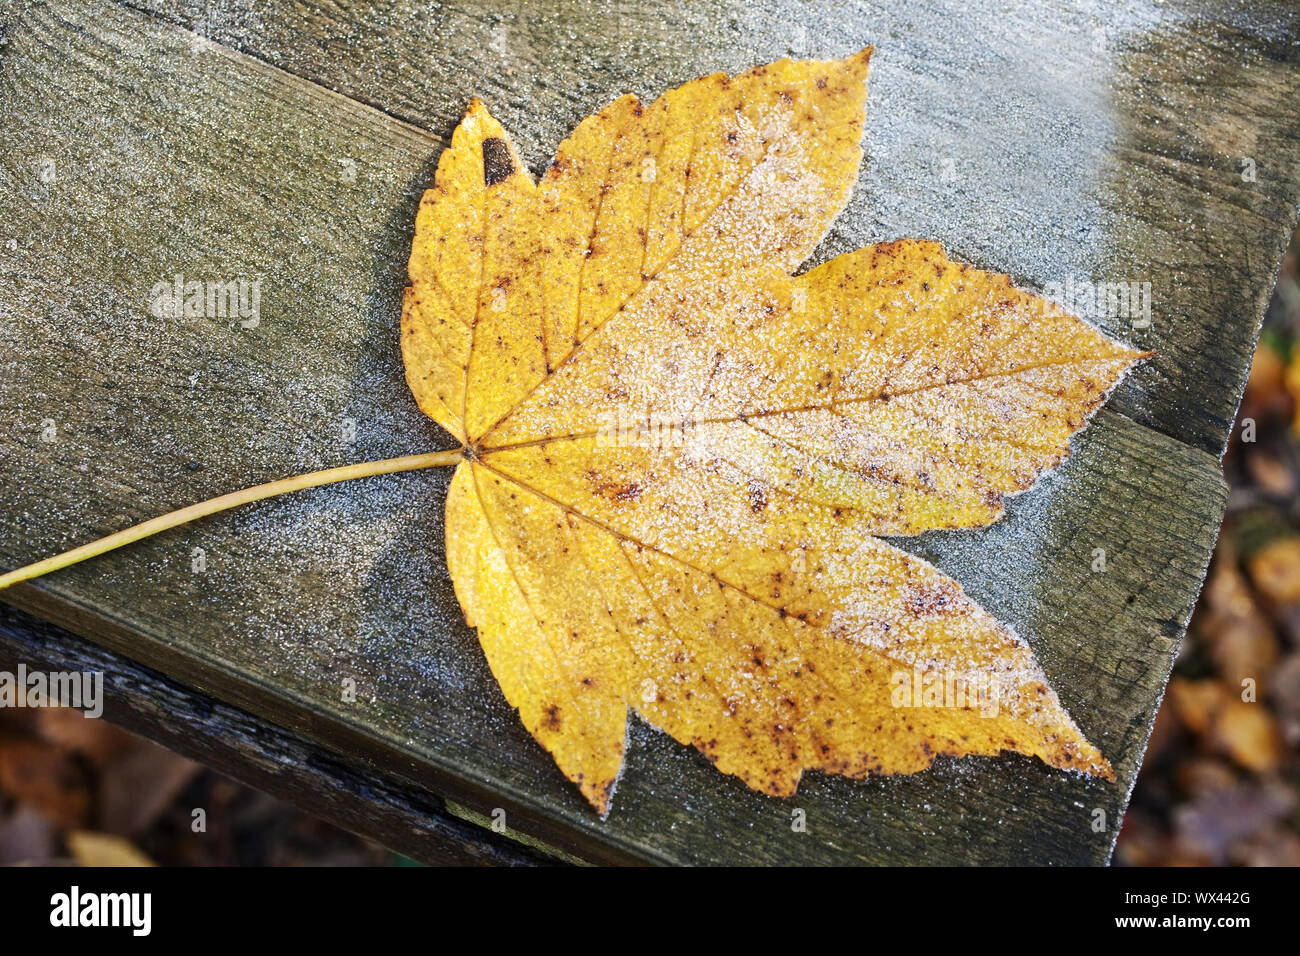 A leaf in autumn, Witten, Ruhr area, North Rhine-Westphalia, Germany, Europe Stock Photo